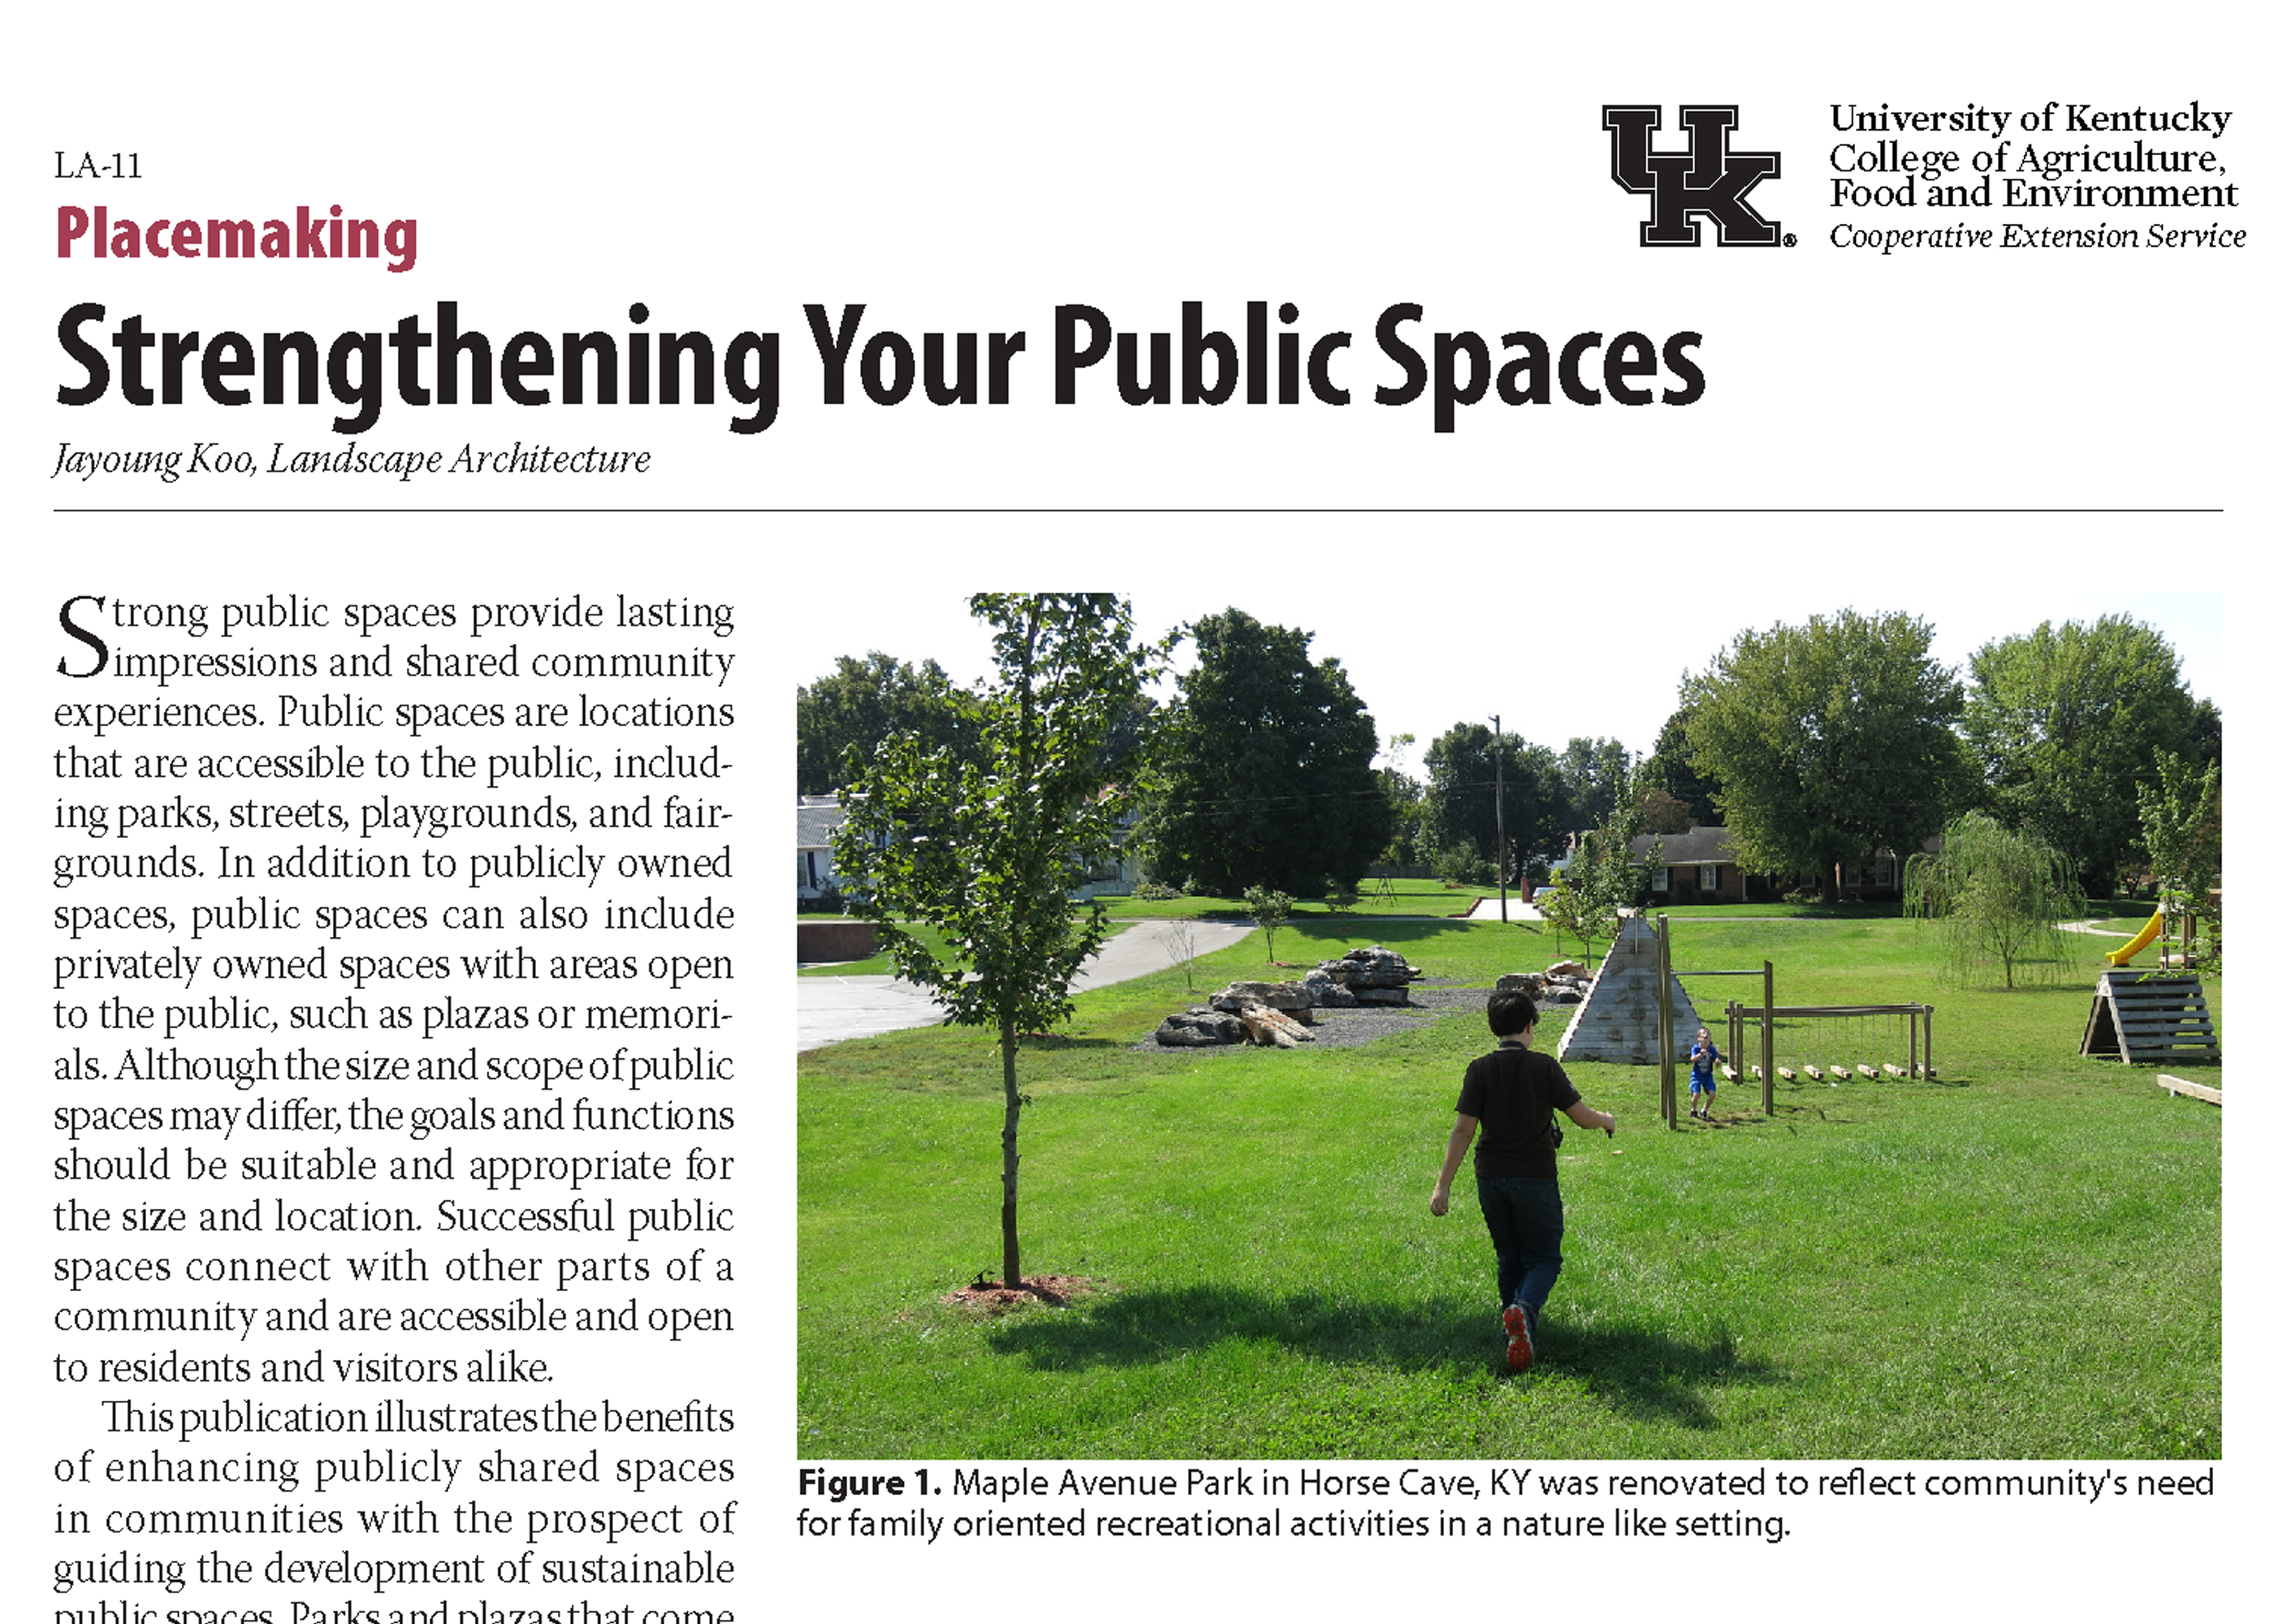 First page of a publication discussing strategies for improving public spaces